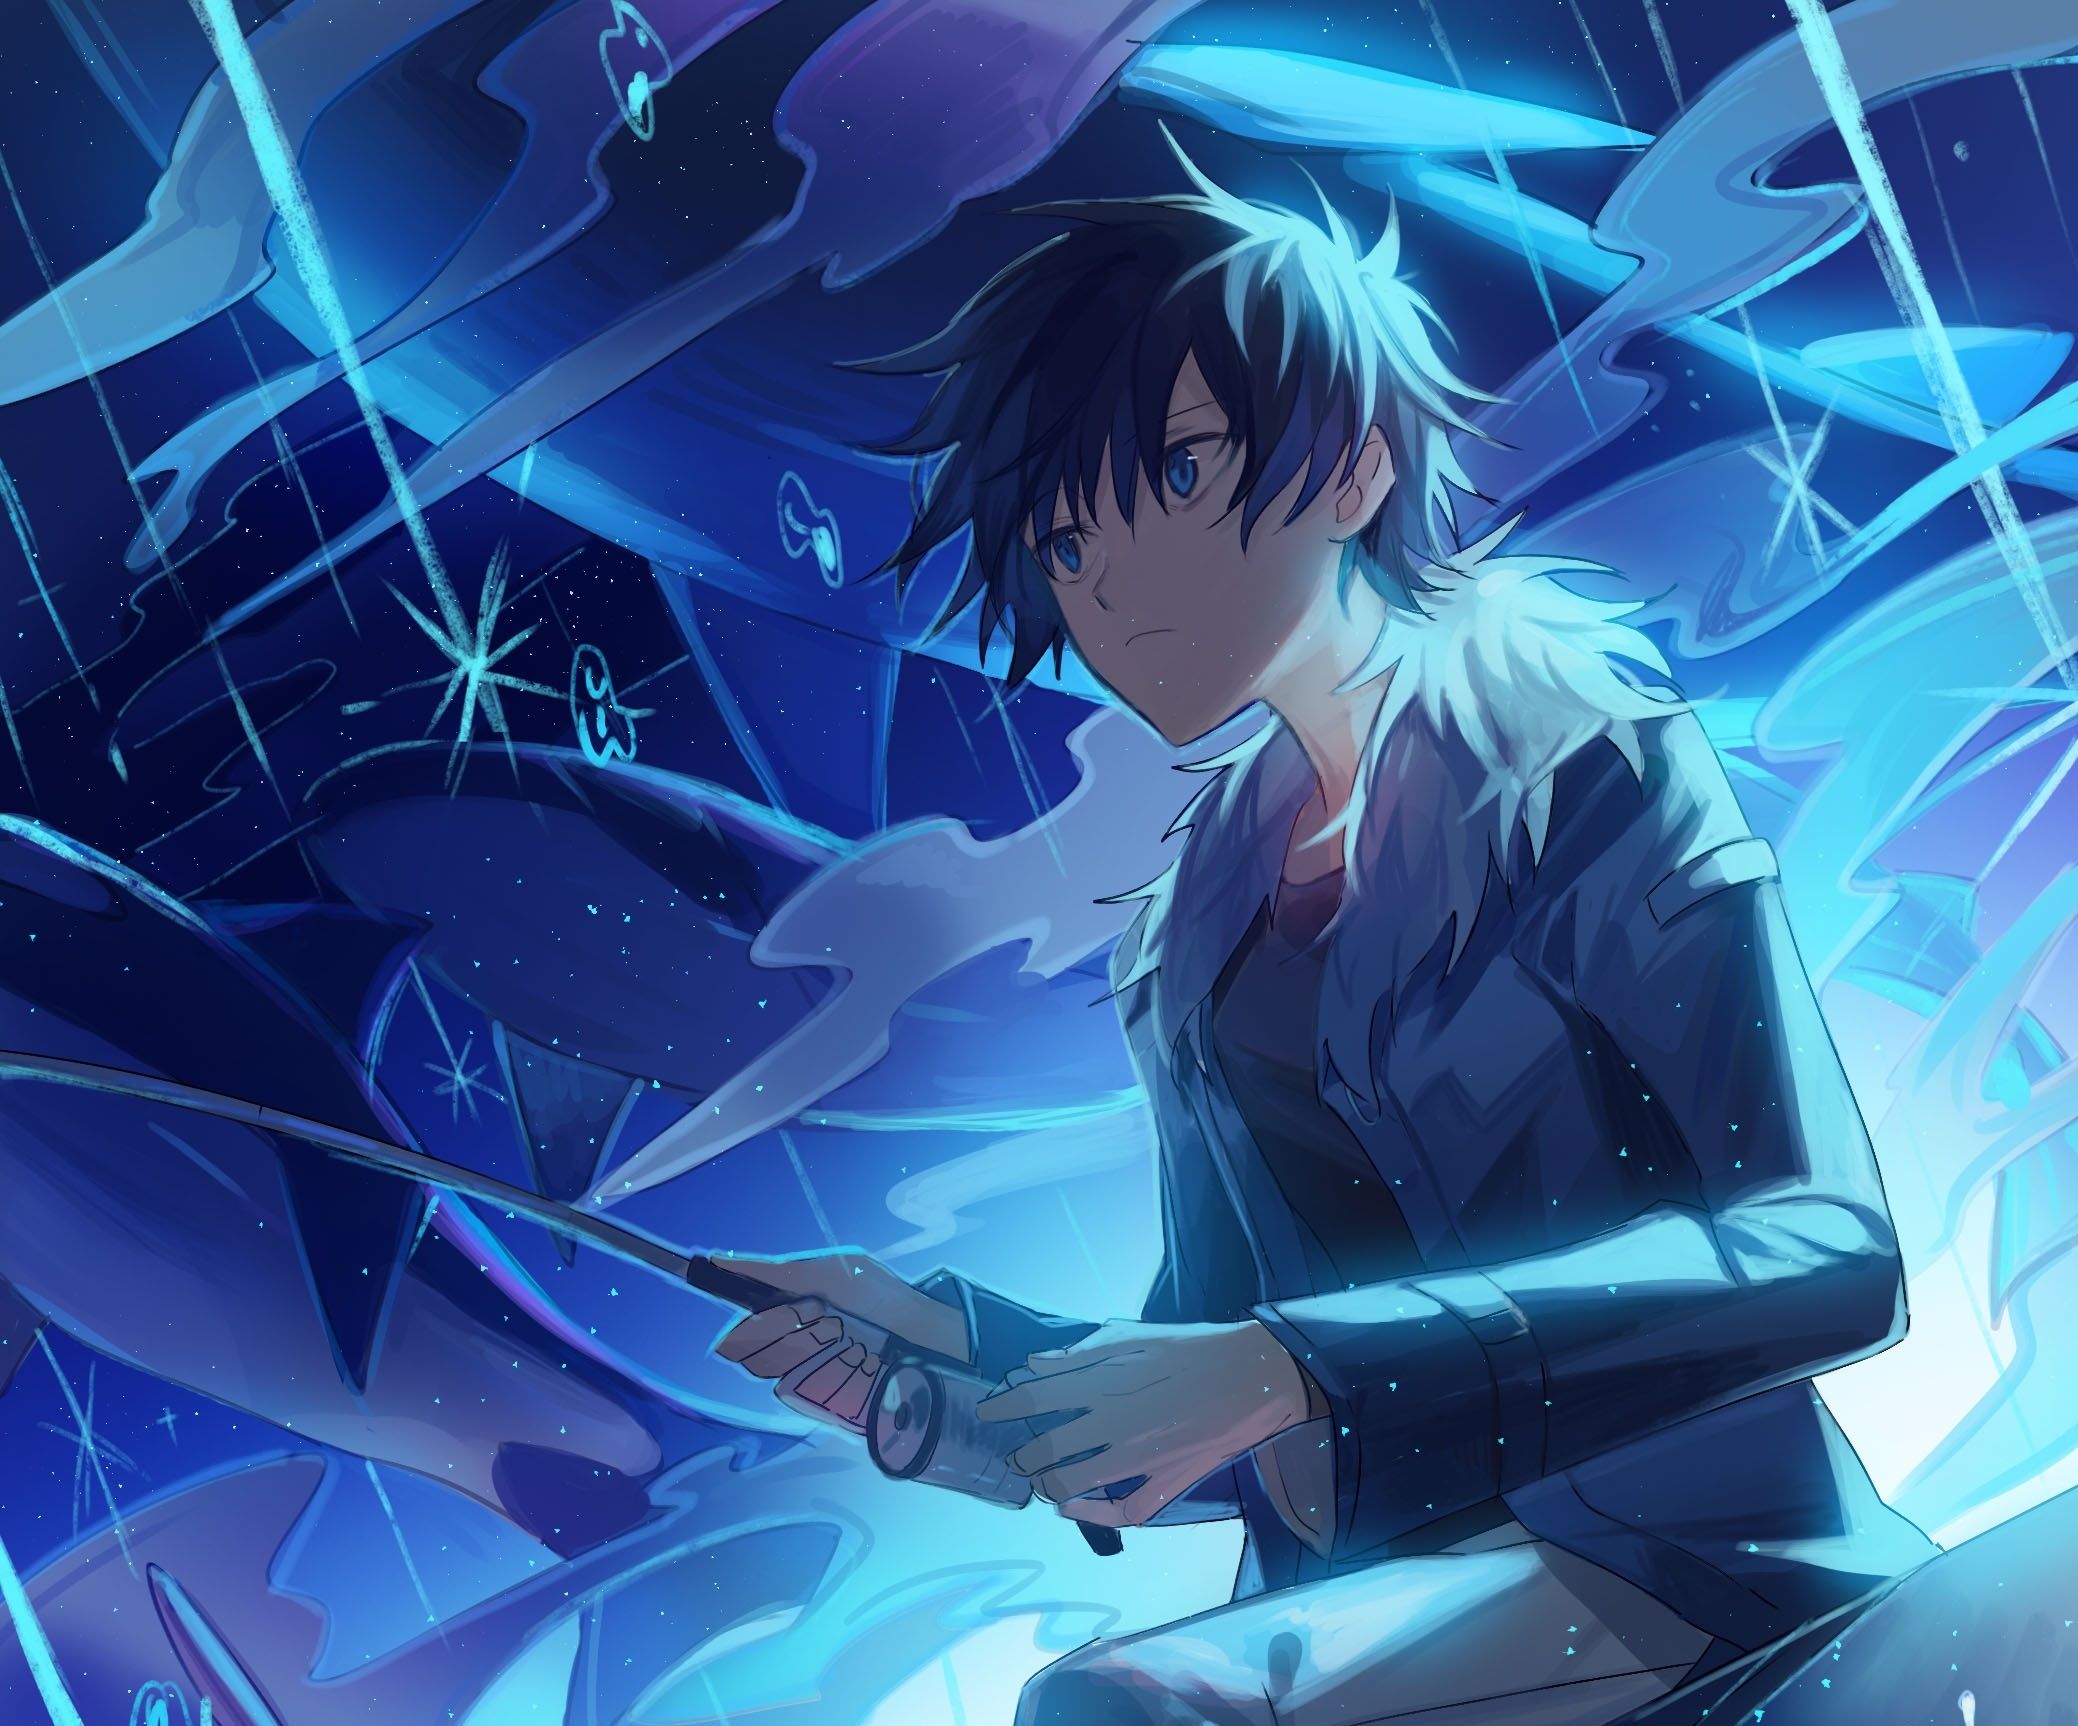 1. "Anime Boy with Blue Hair" by @kawacy on DeviantArt - wide 4